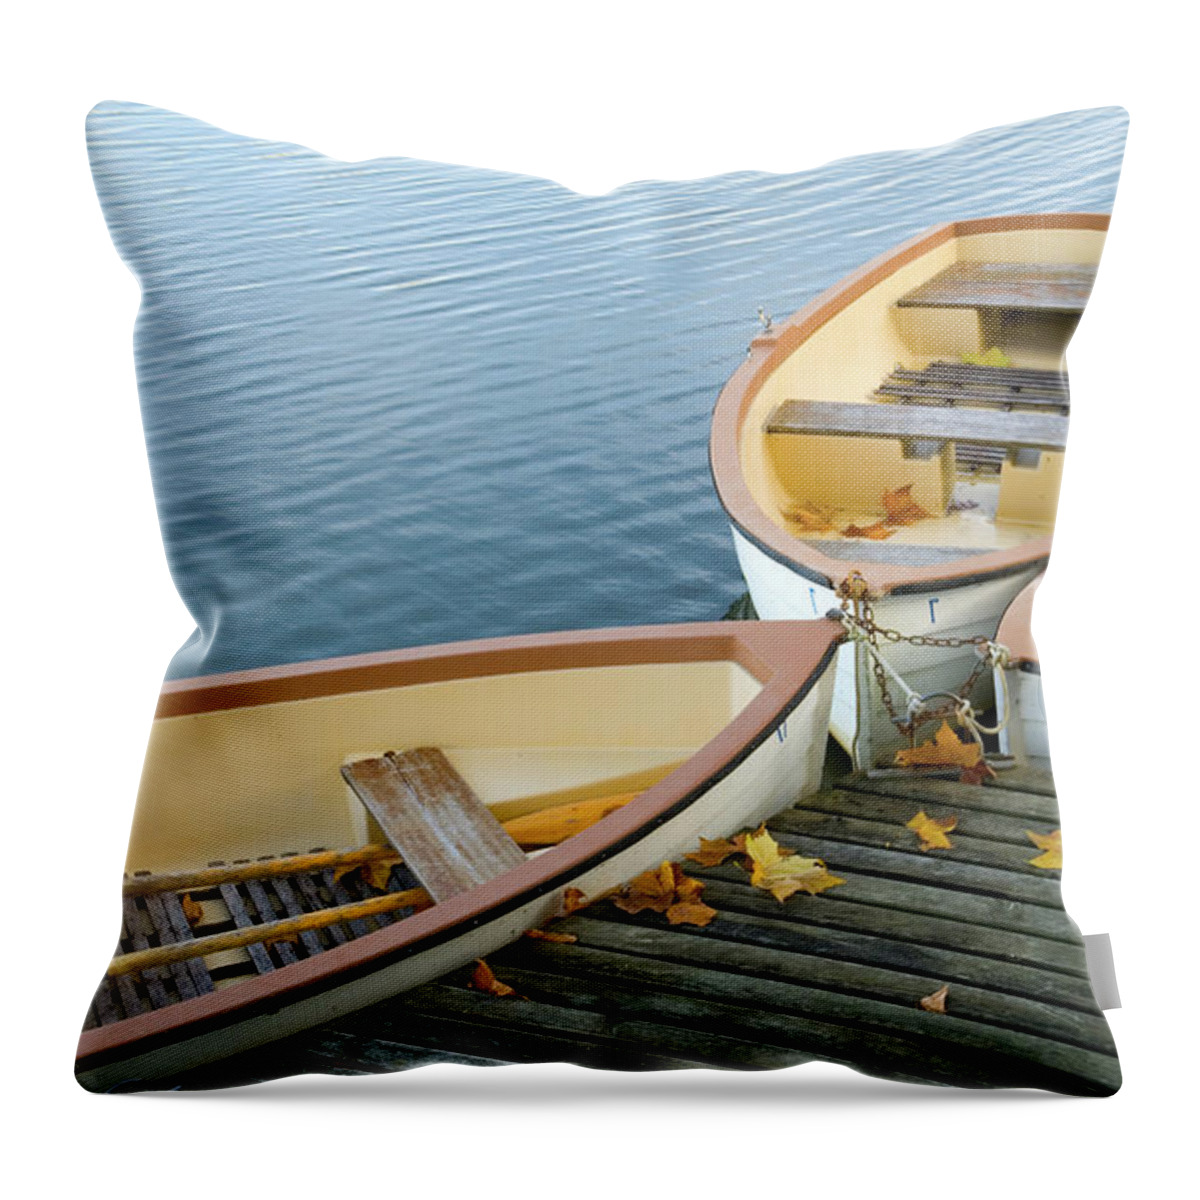 Tranquility Throw Pillow featuring the photograph Three Boats Floating On Pond Beside Pier by Les Beautés De La Nature / Natural Beauties